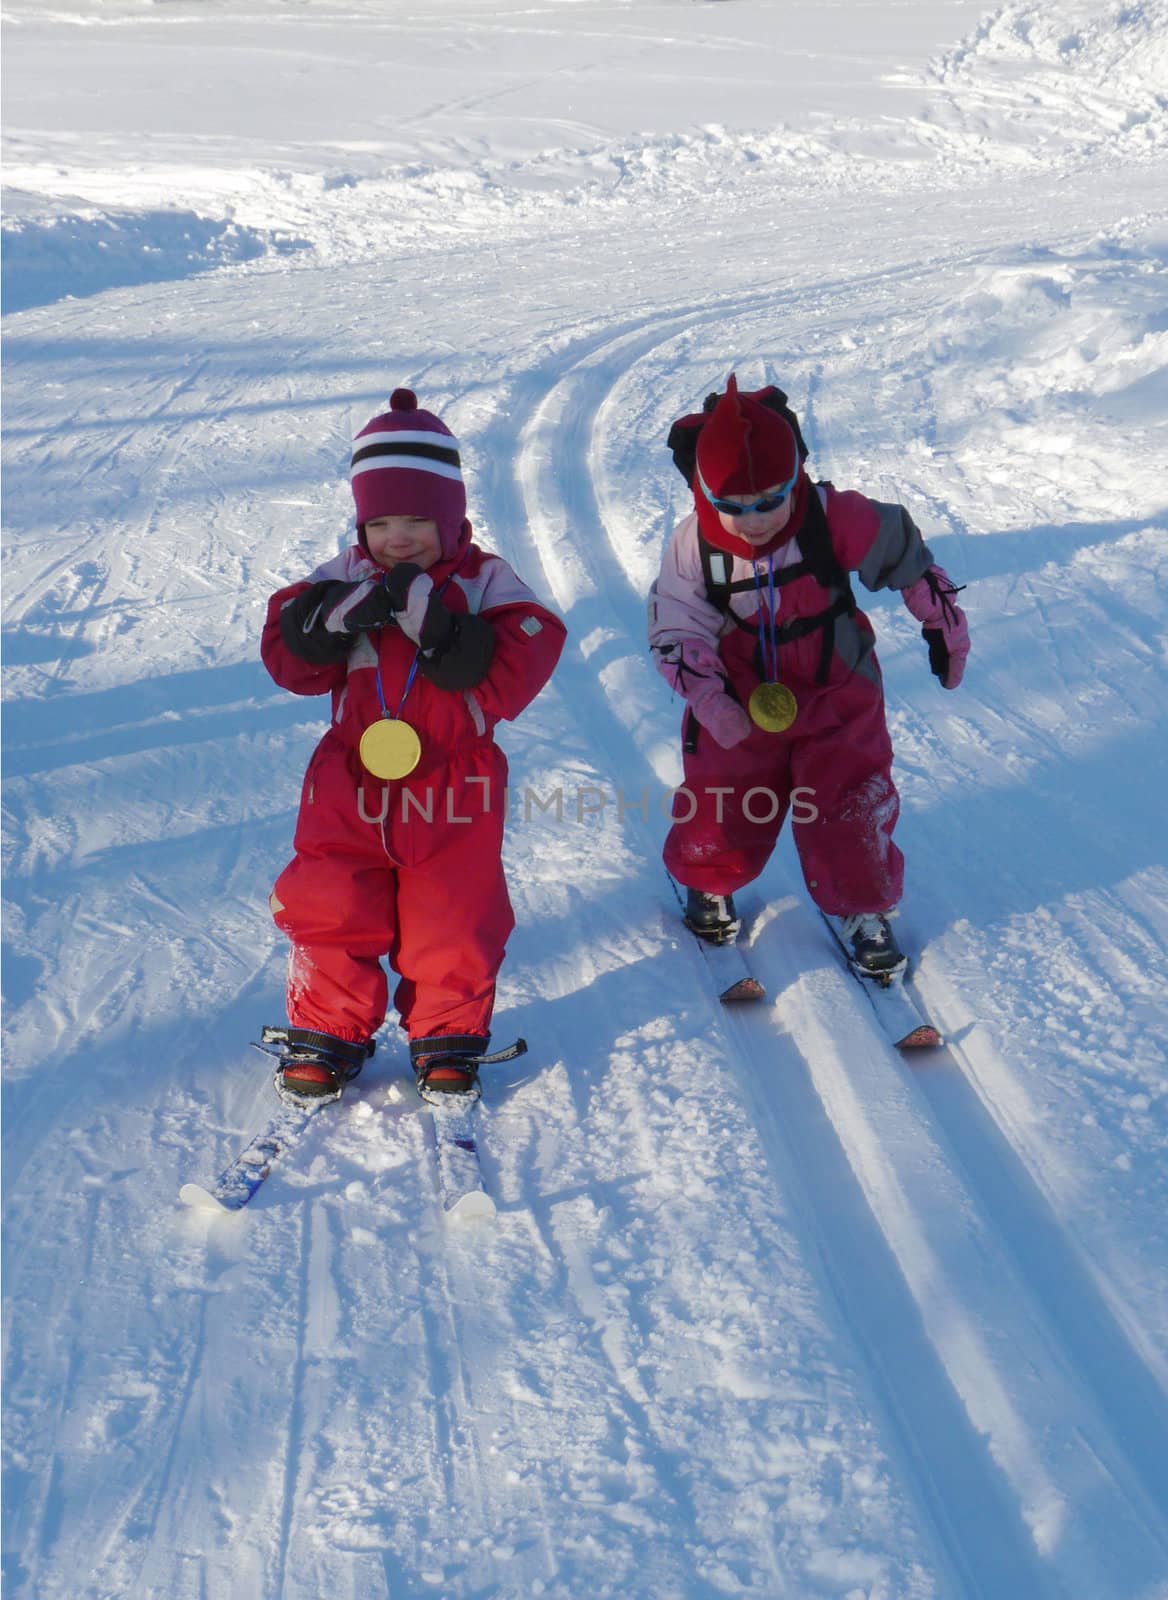 Children participating in a cross country ski race, both have won big chocolate medals